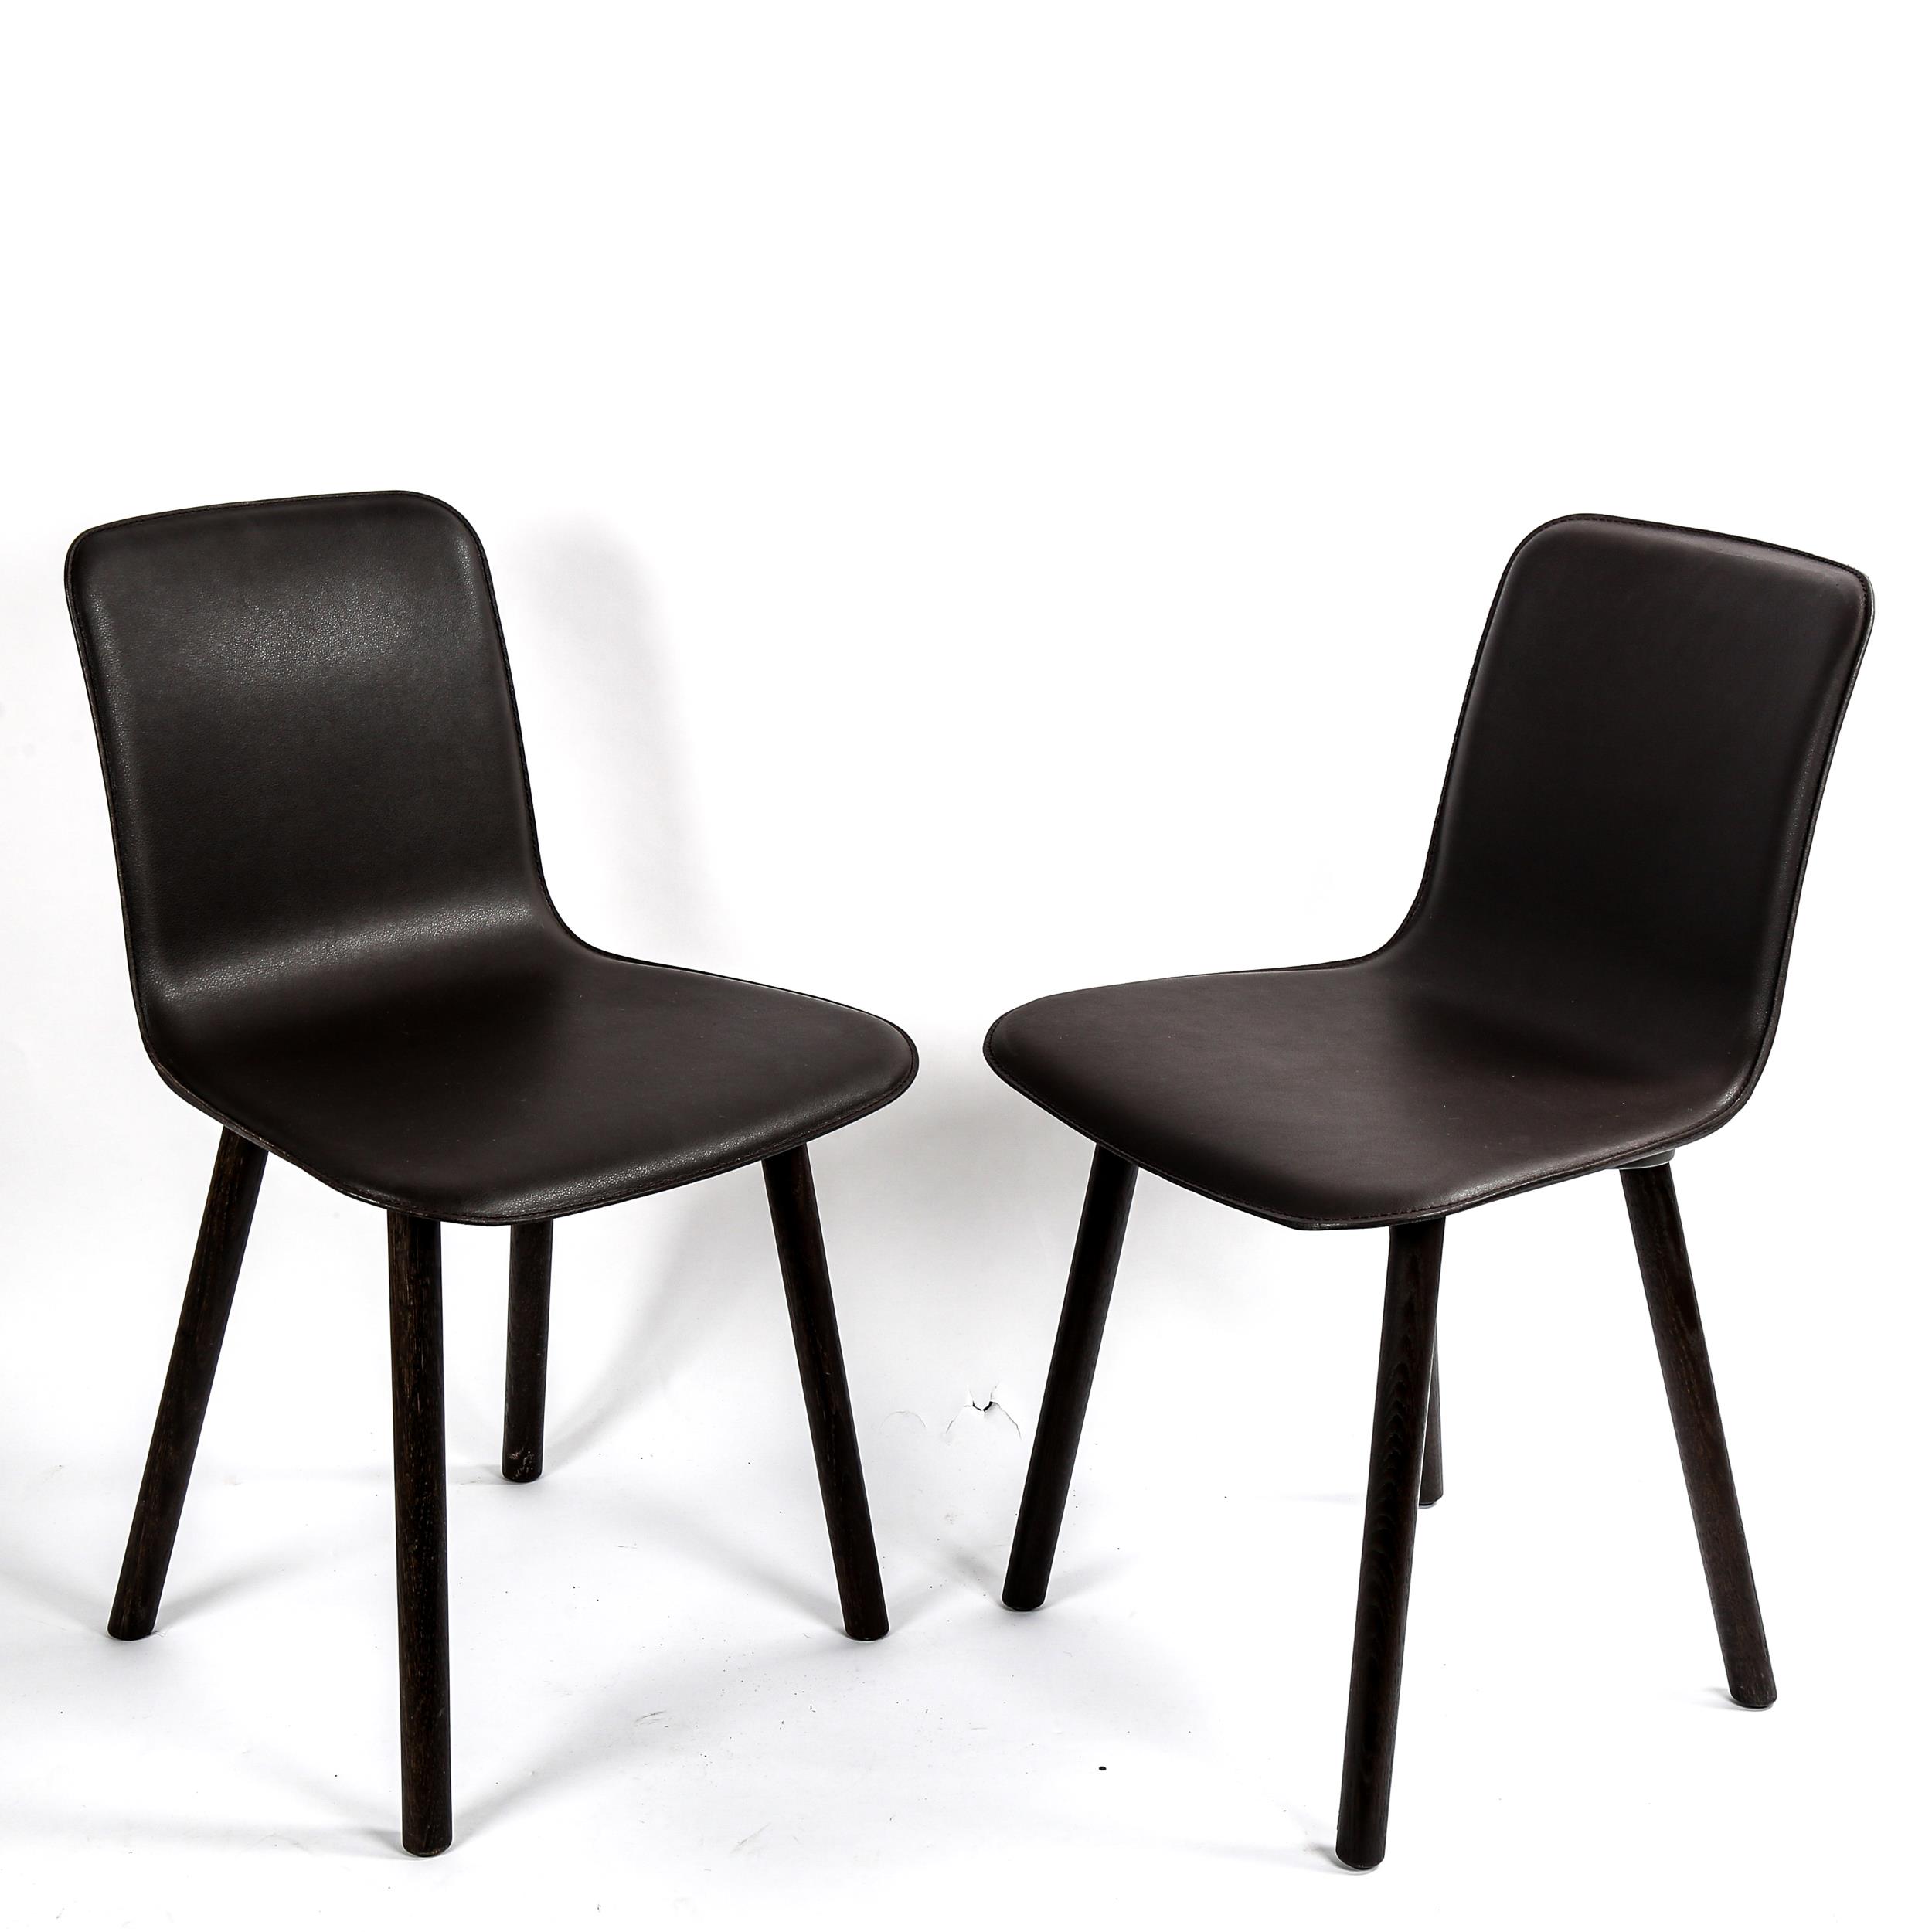 JASPER MORRISON for Vitra, a pair of Hal leather and wood side chairs, with impressed maker's